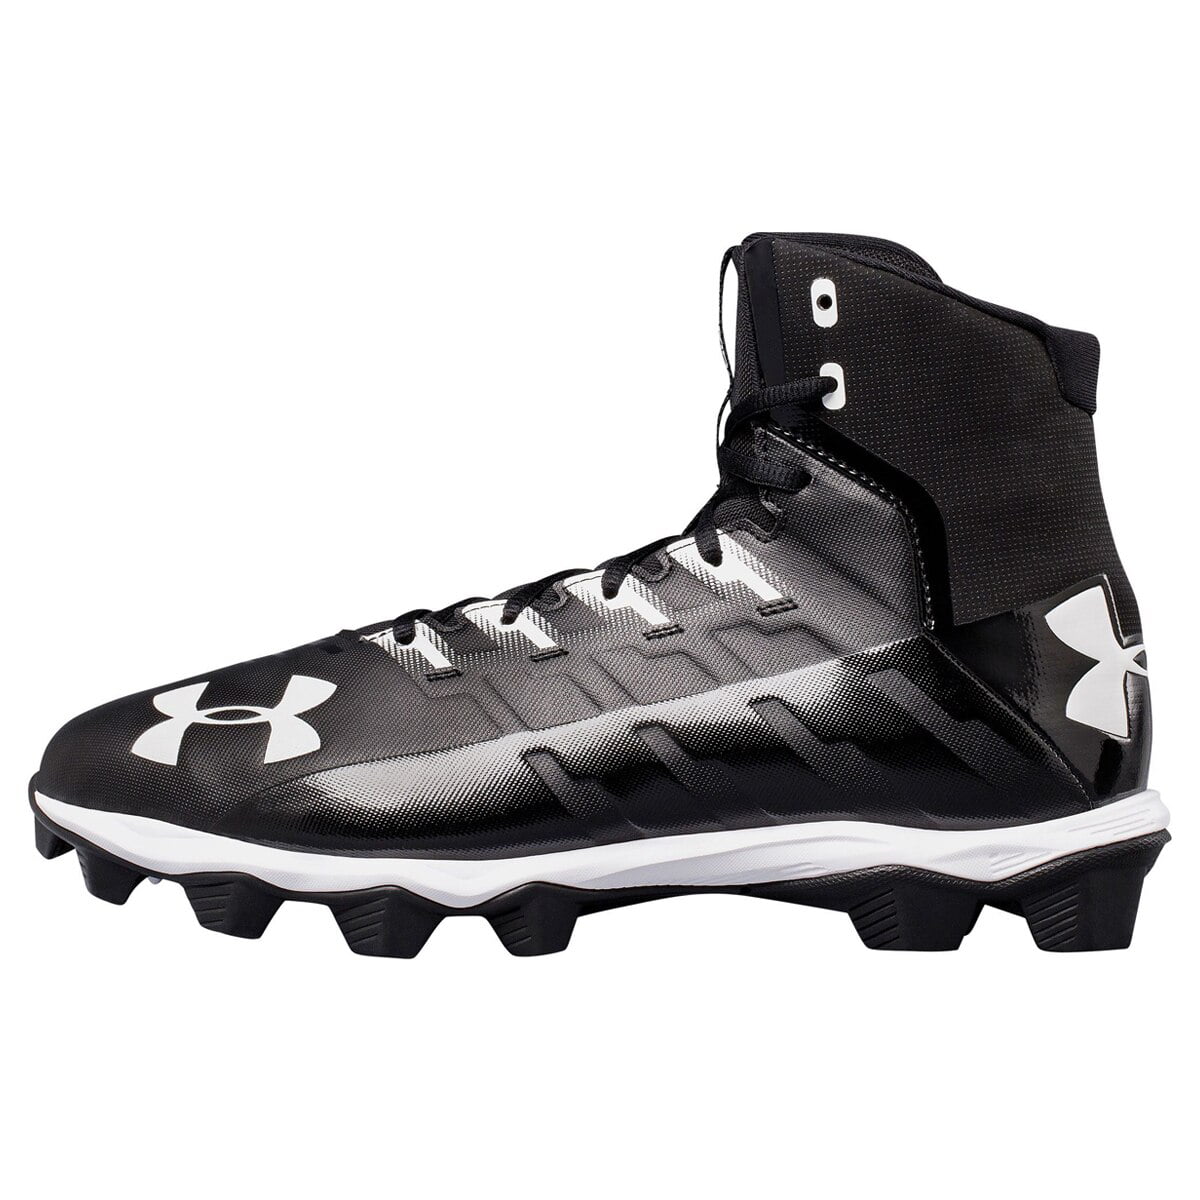 New Mens Under Armour Renegade RM Mid Football Cleats Black/White Sz 7.5 M 